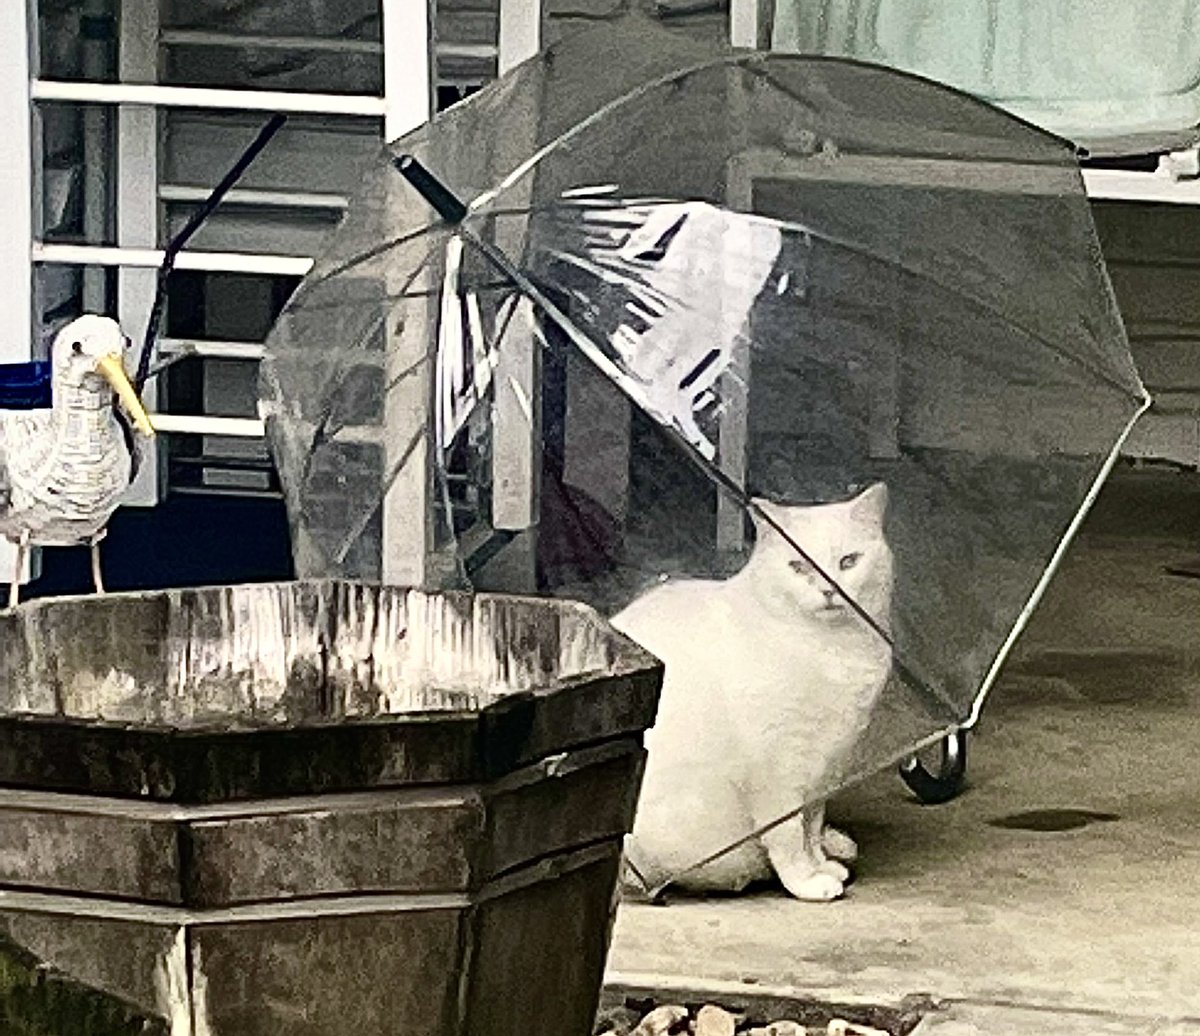 May The 4TH Be With You, Huggers! 🎶🤗🎶 Happy Star Wars Day. This is my neighbor’s cat, Leia, in her Death Star. A very welcome rainy day today. Have a great weekend. 🤗